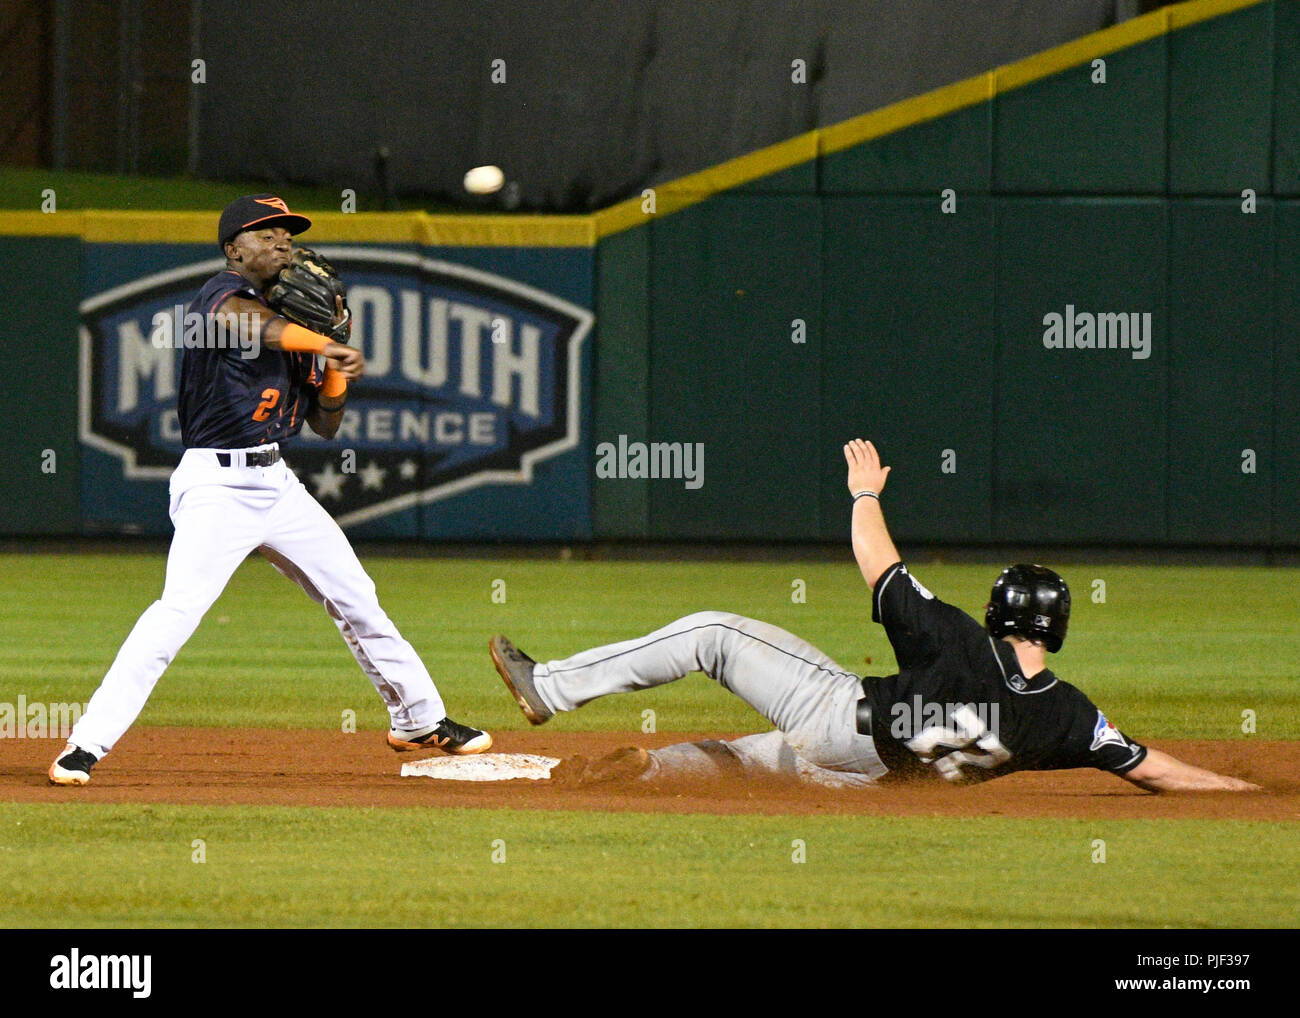 The Second Round. 6th Sep, 2018. USA Bowling Green Hot Rods second baseman Vidal Brujan (2) turns a double play as Lansing Lugnuts catcher Ryan Gold (22) slides into second base during a Mid West League series between the Lansing Lugnuts and the Bowling Green Hot Rods in Bowling Green, KY st Bowling Green Ballpark. Hot Rods sweep Lugnuts and advance to the second round. (Mandatory Photo Credit: Steve Roberts/CSM) Credit: csm/Alamy Live News Stock Photo